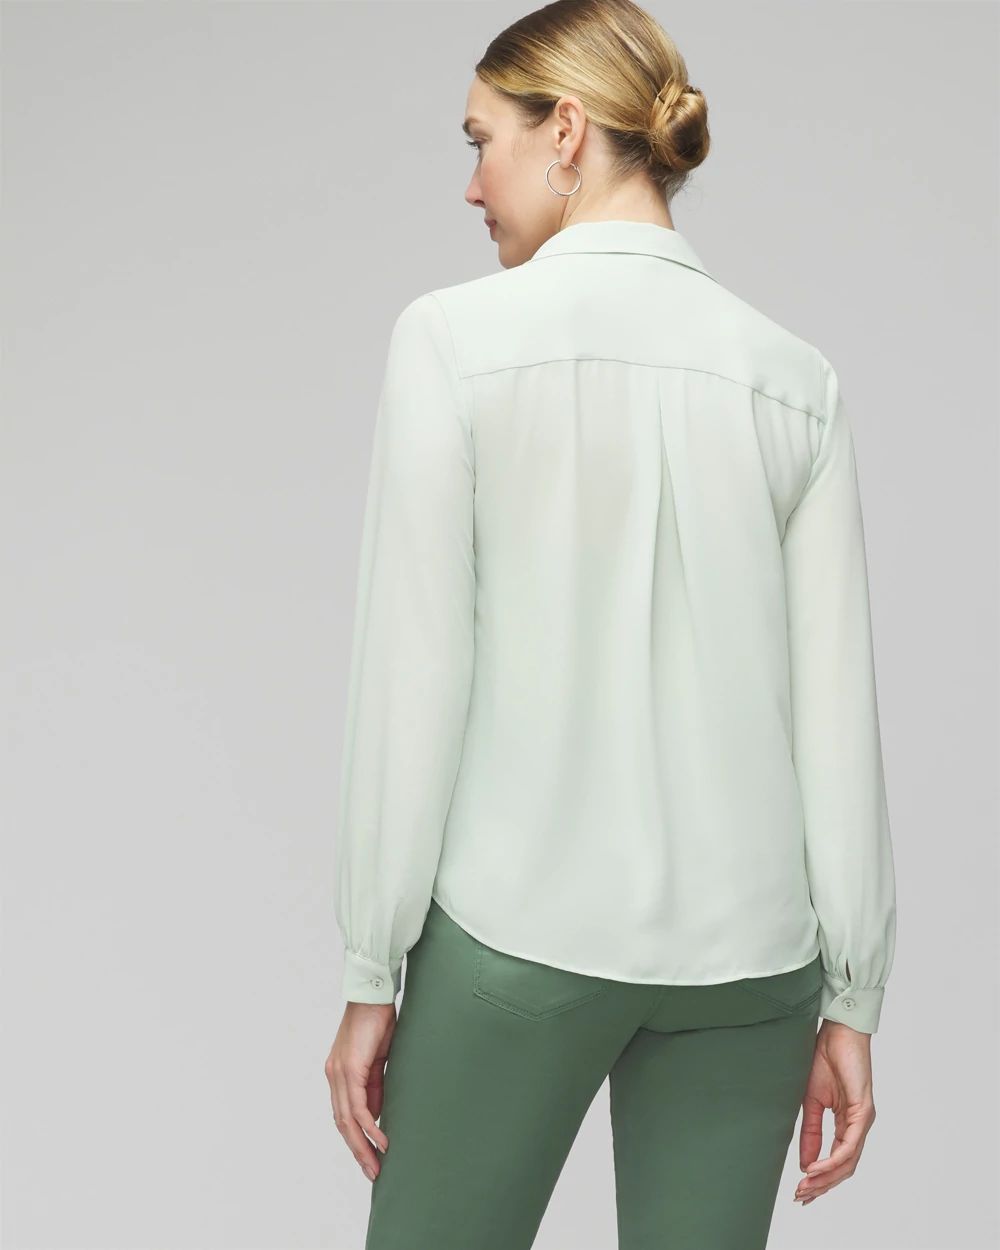 Petite Long-Sleeve Soft Shirt click to view larger image.